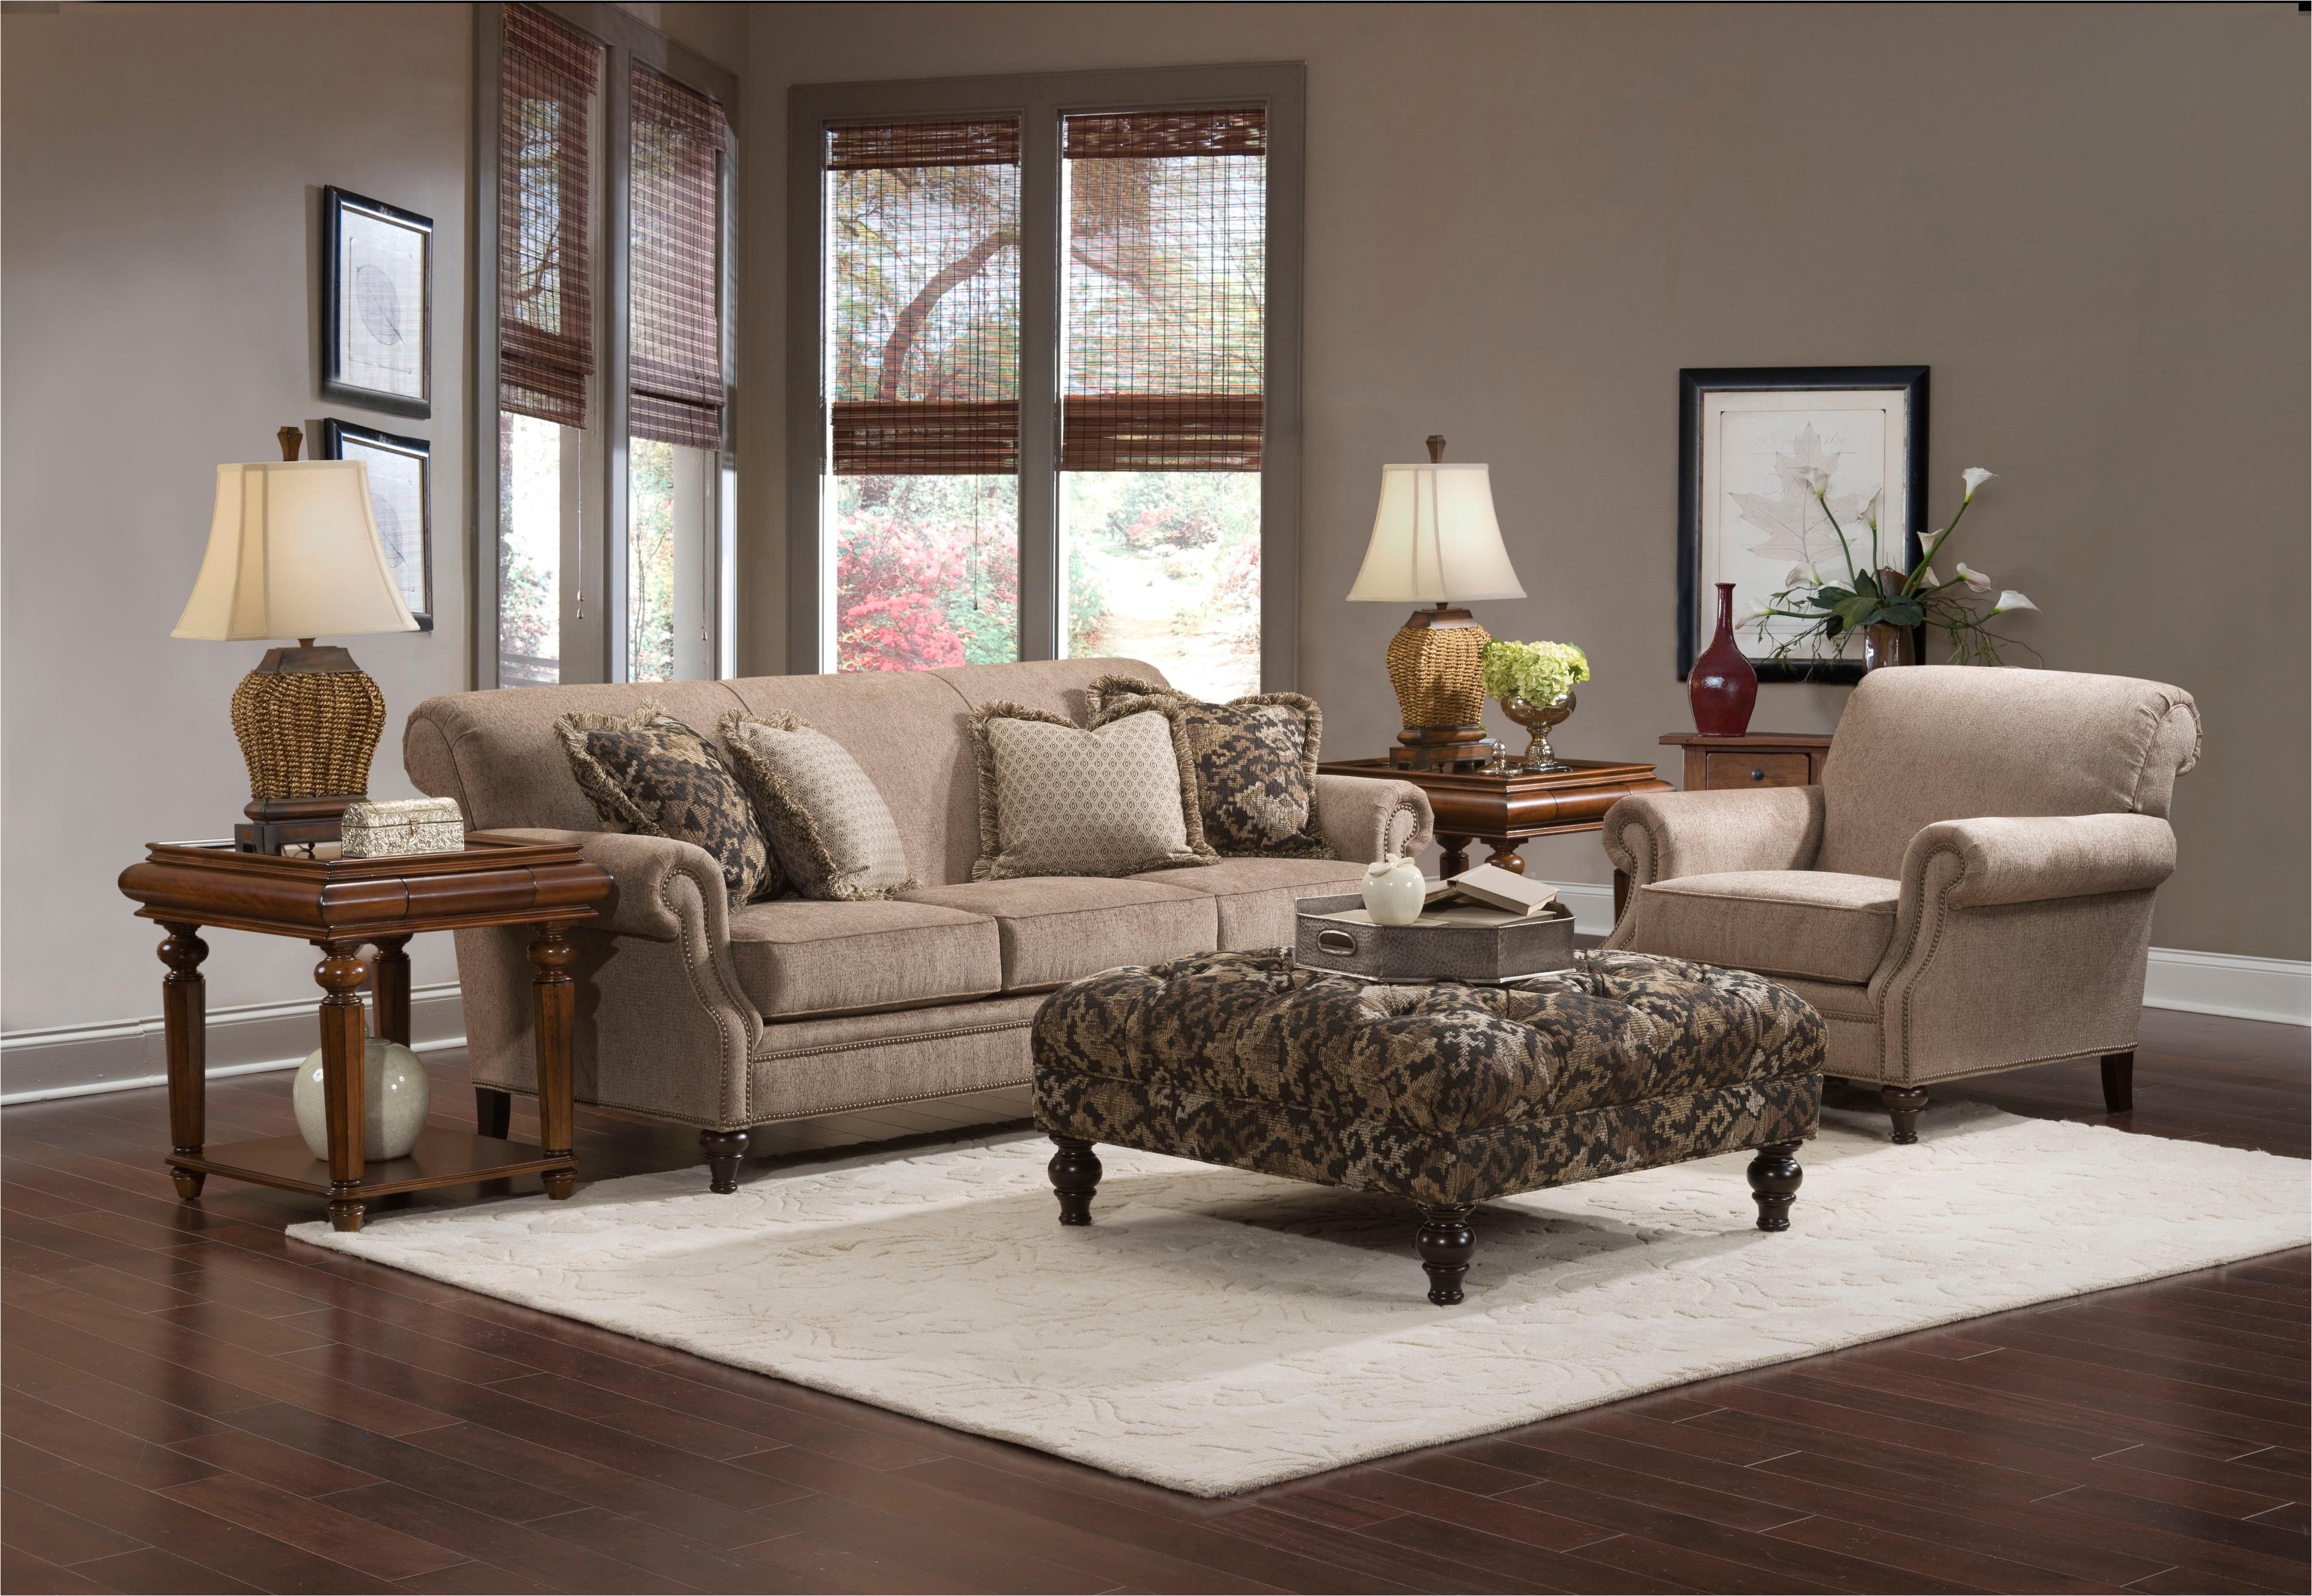 broyhill furniture windsor sofa with rolled arms becker furniture world sofa twin cities minneapolis st paul minnesota